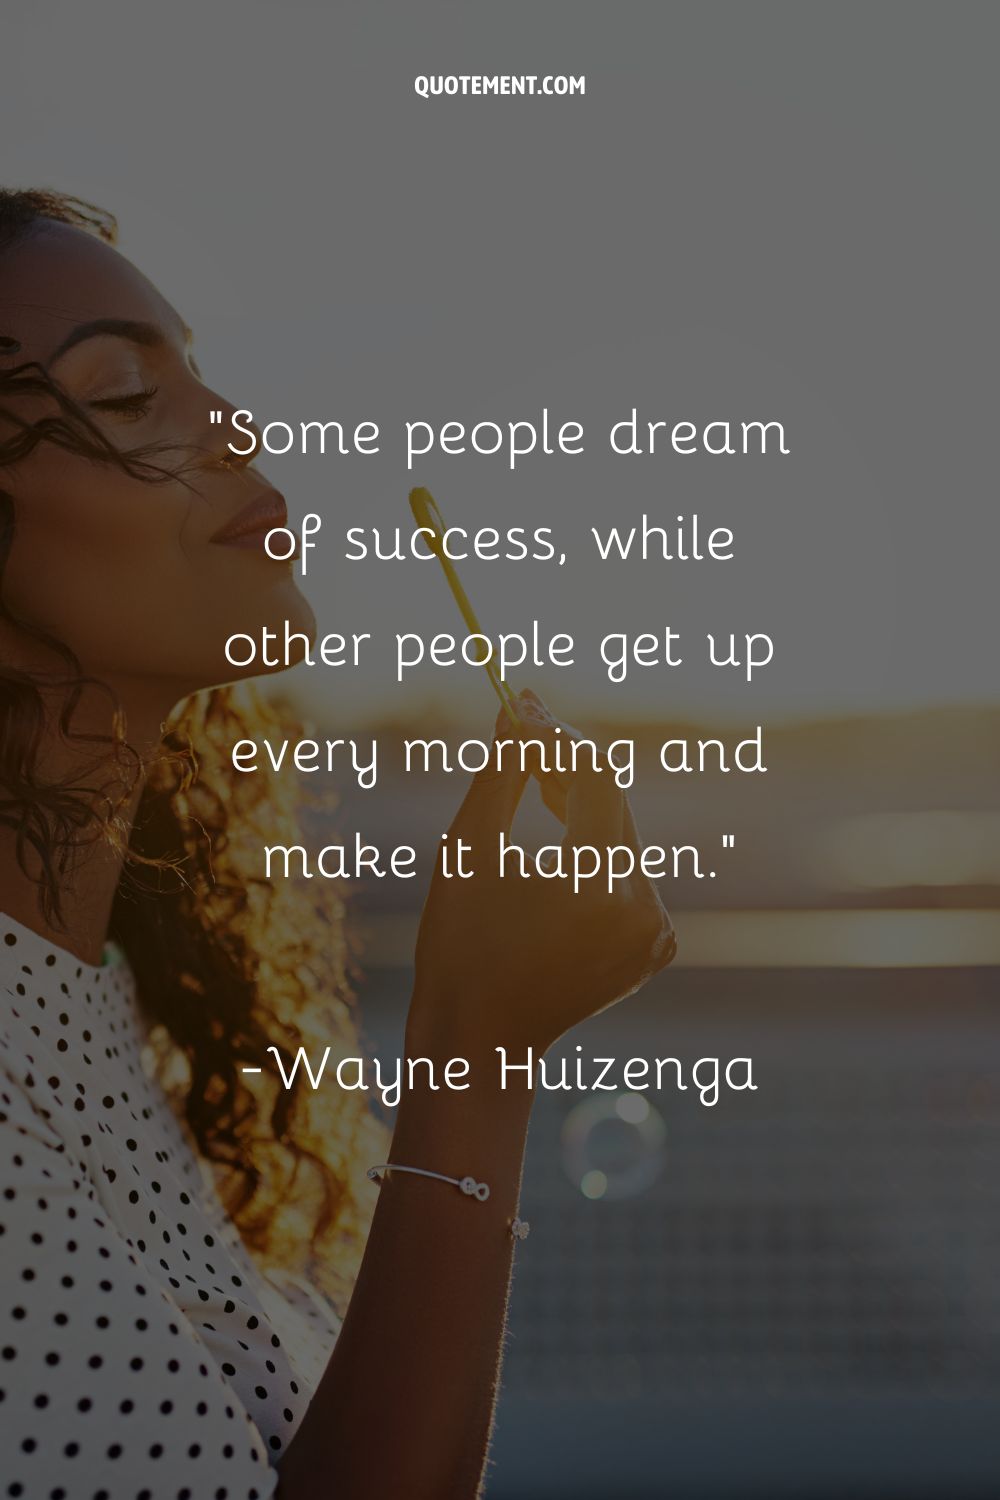 Some people dream of success, while other people get up every morning and make it happen